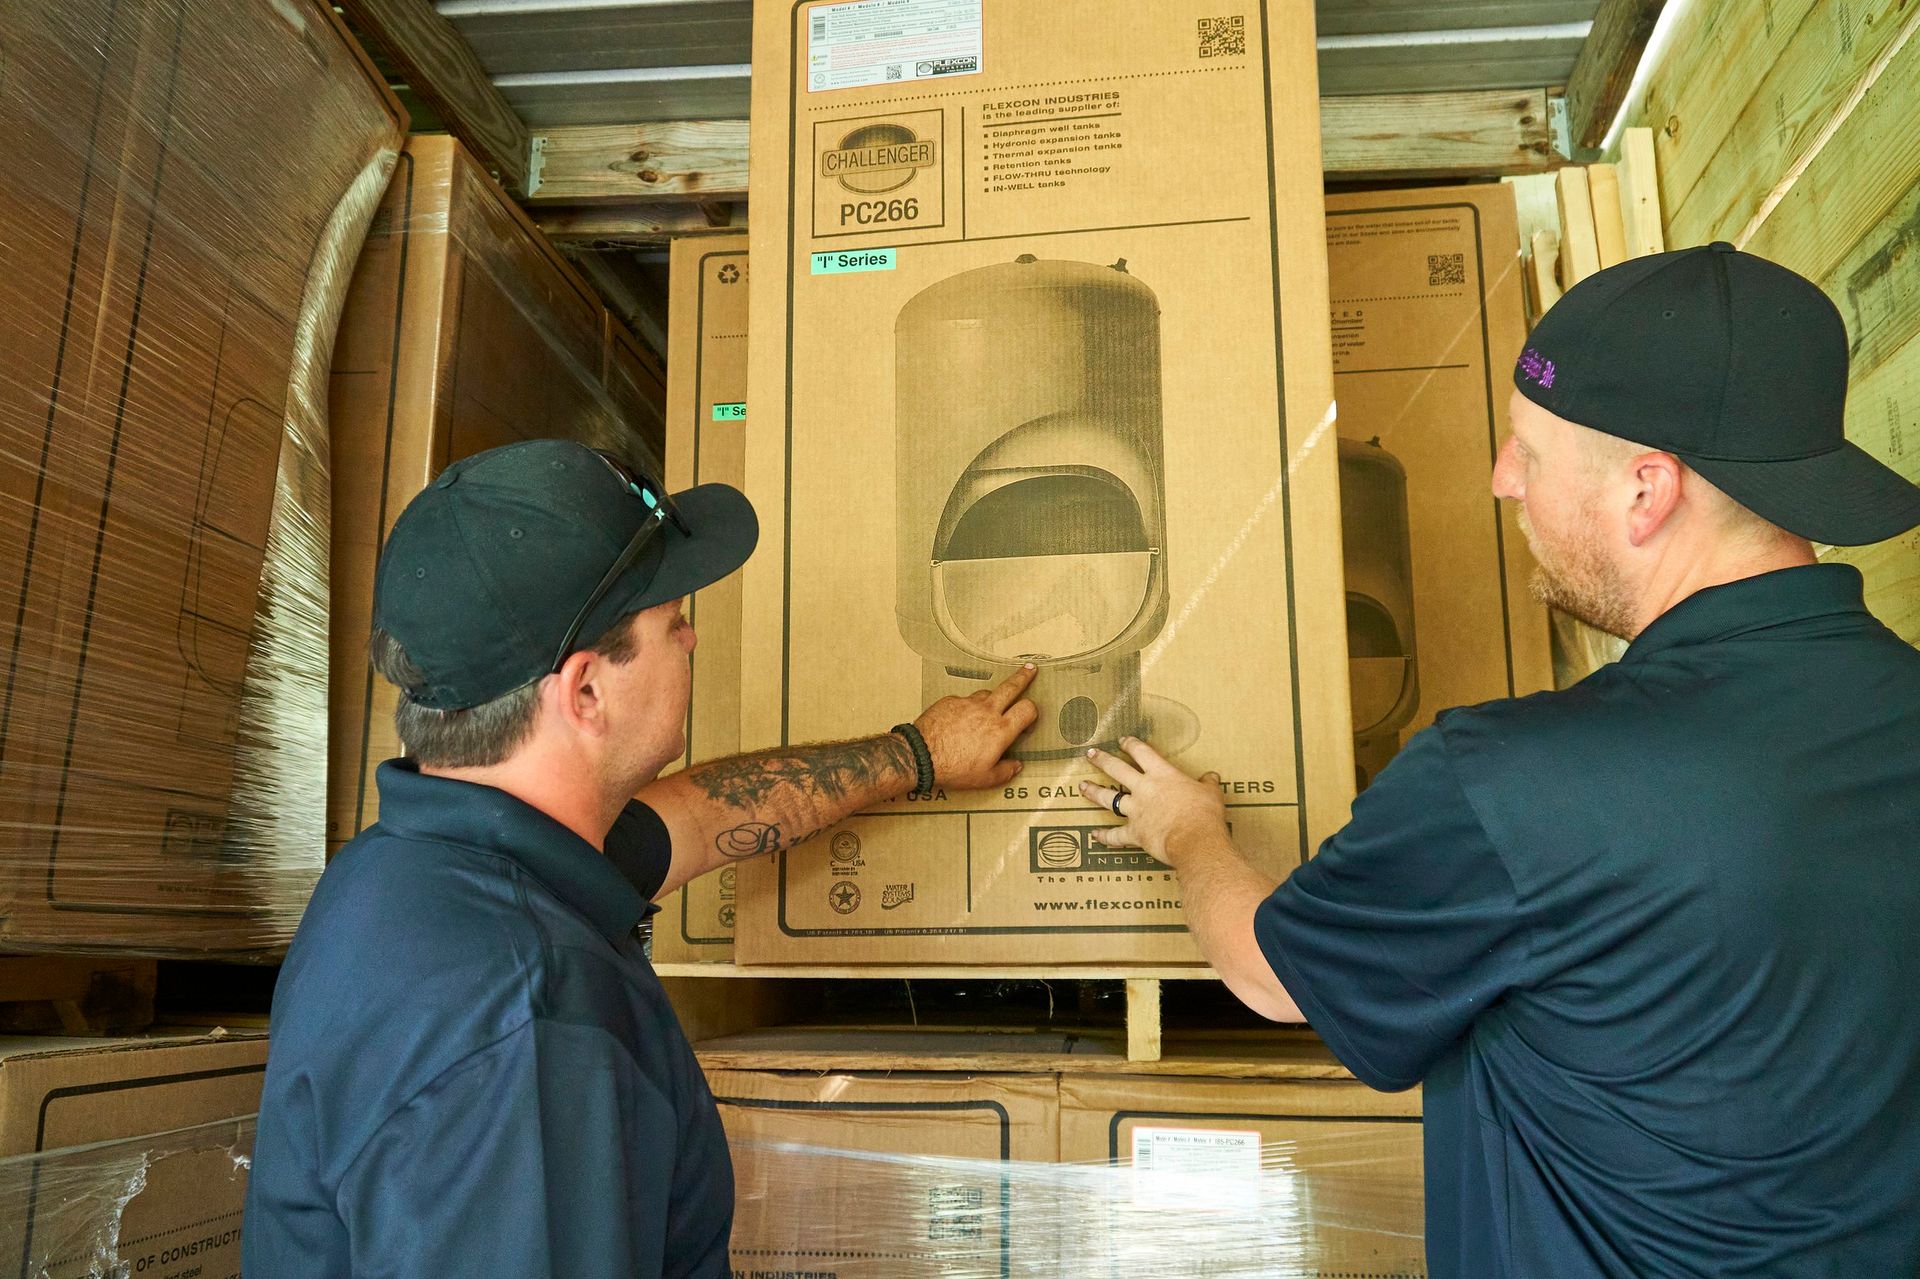 Two men are looking at a cardboard box in a truck.